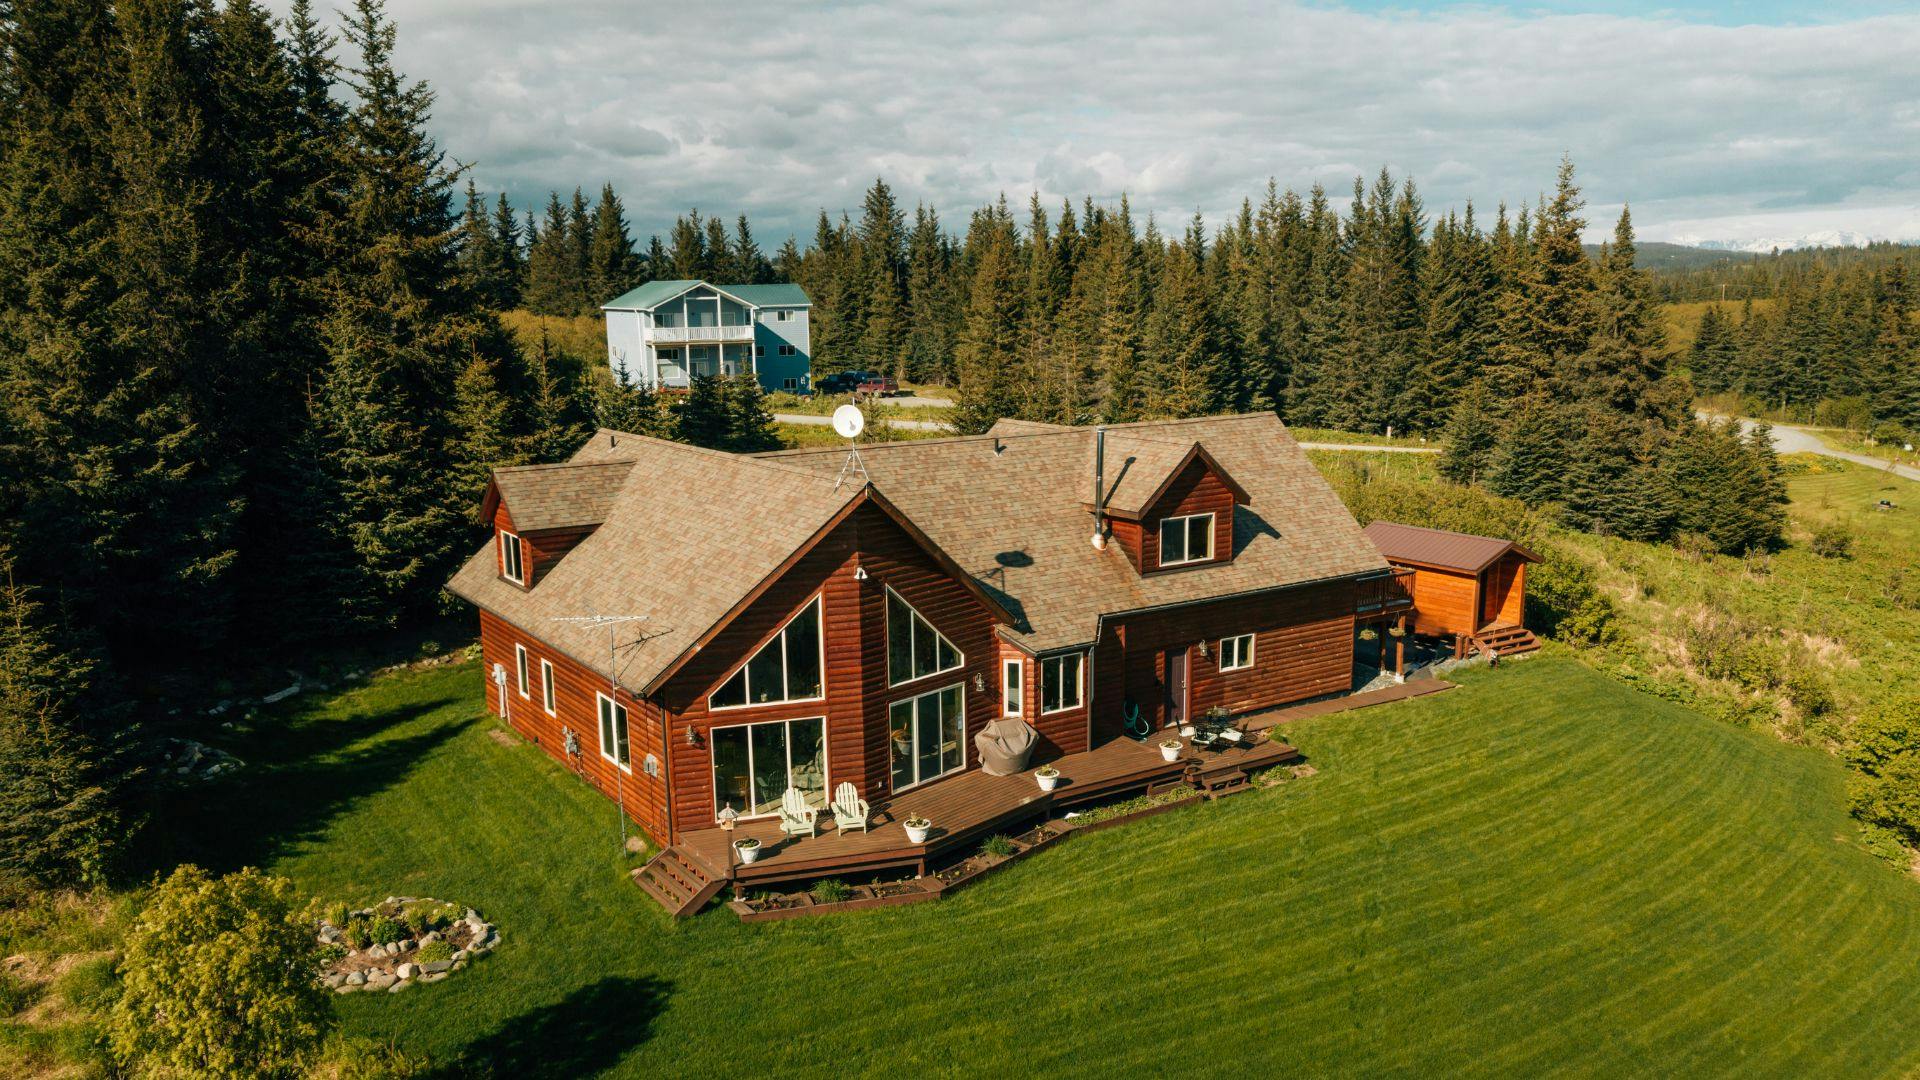 Aerial view of a large log cabin home surrounded by trees with floor to ceiling picture windows, back deck overlooking expansive lawn